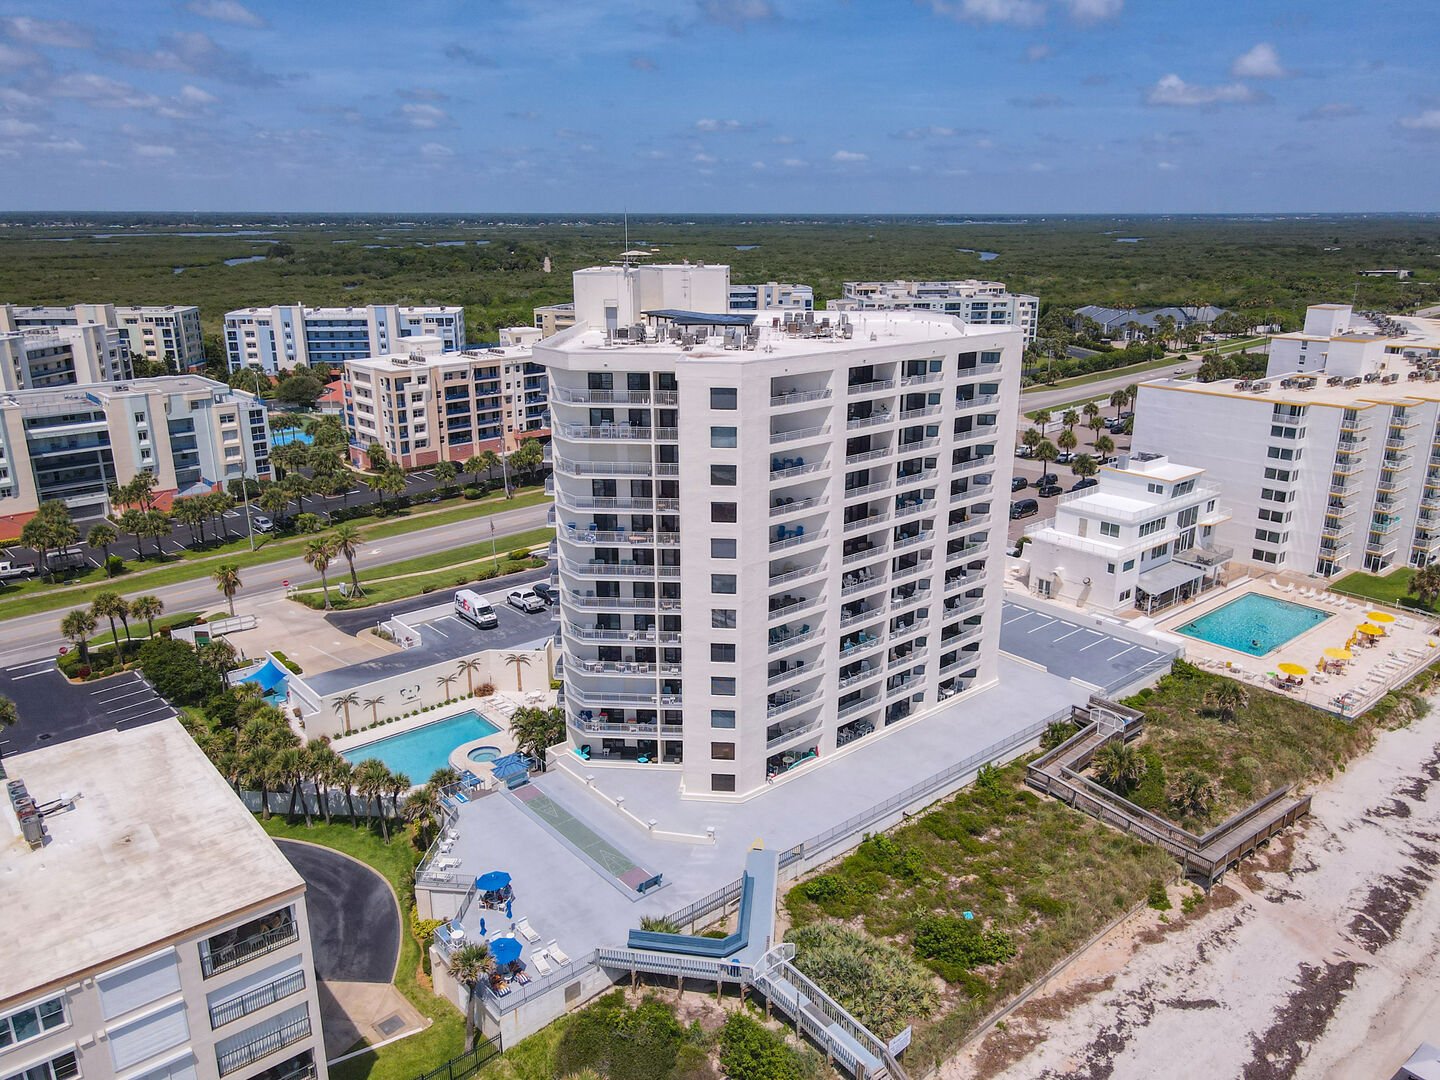 Seascape has a lot of great amenities to enjoy and is located on a car free beach area!